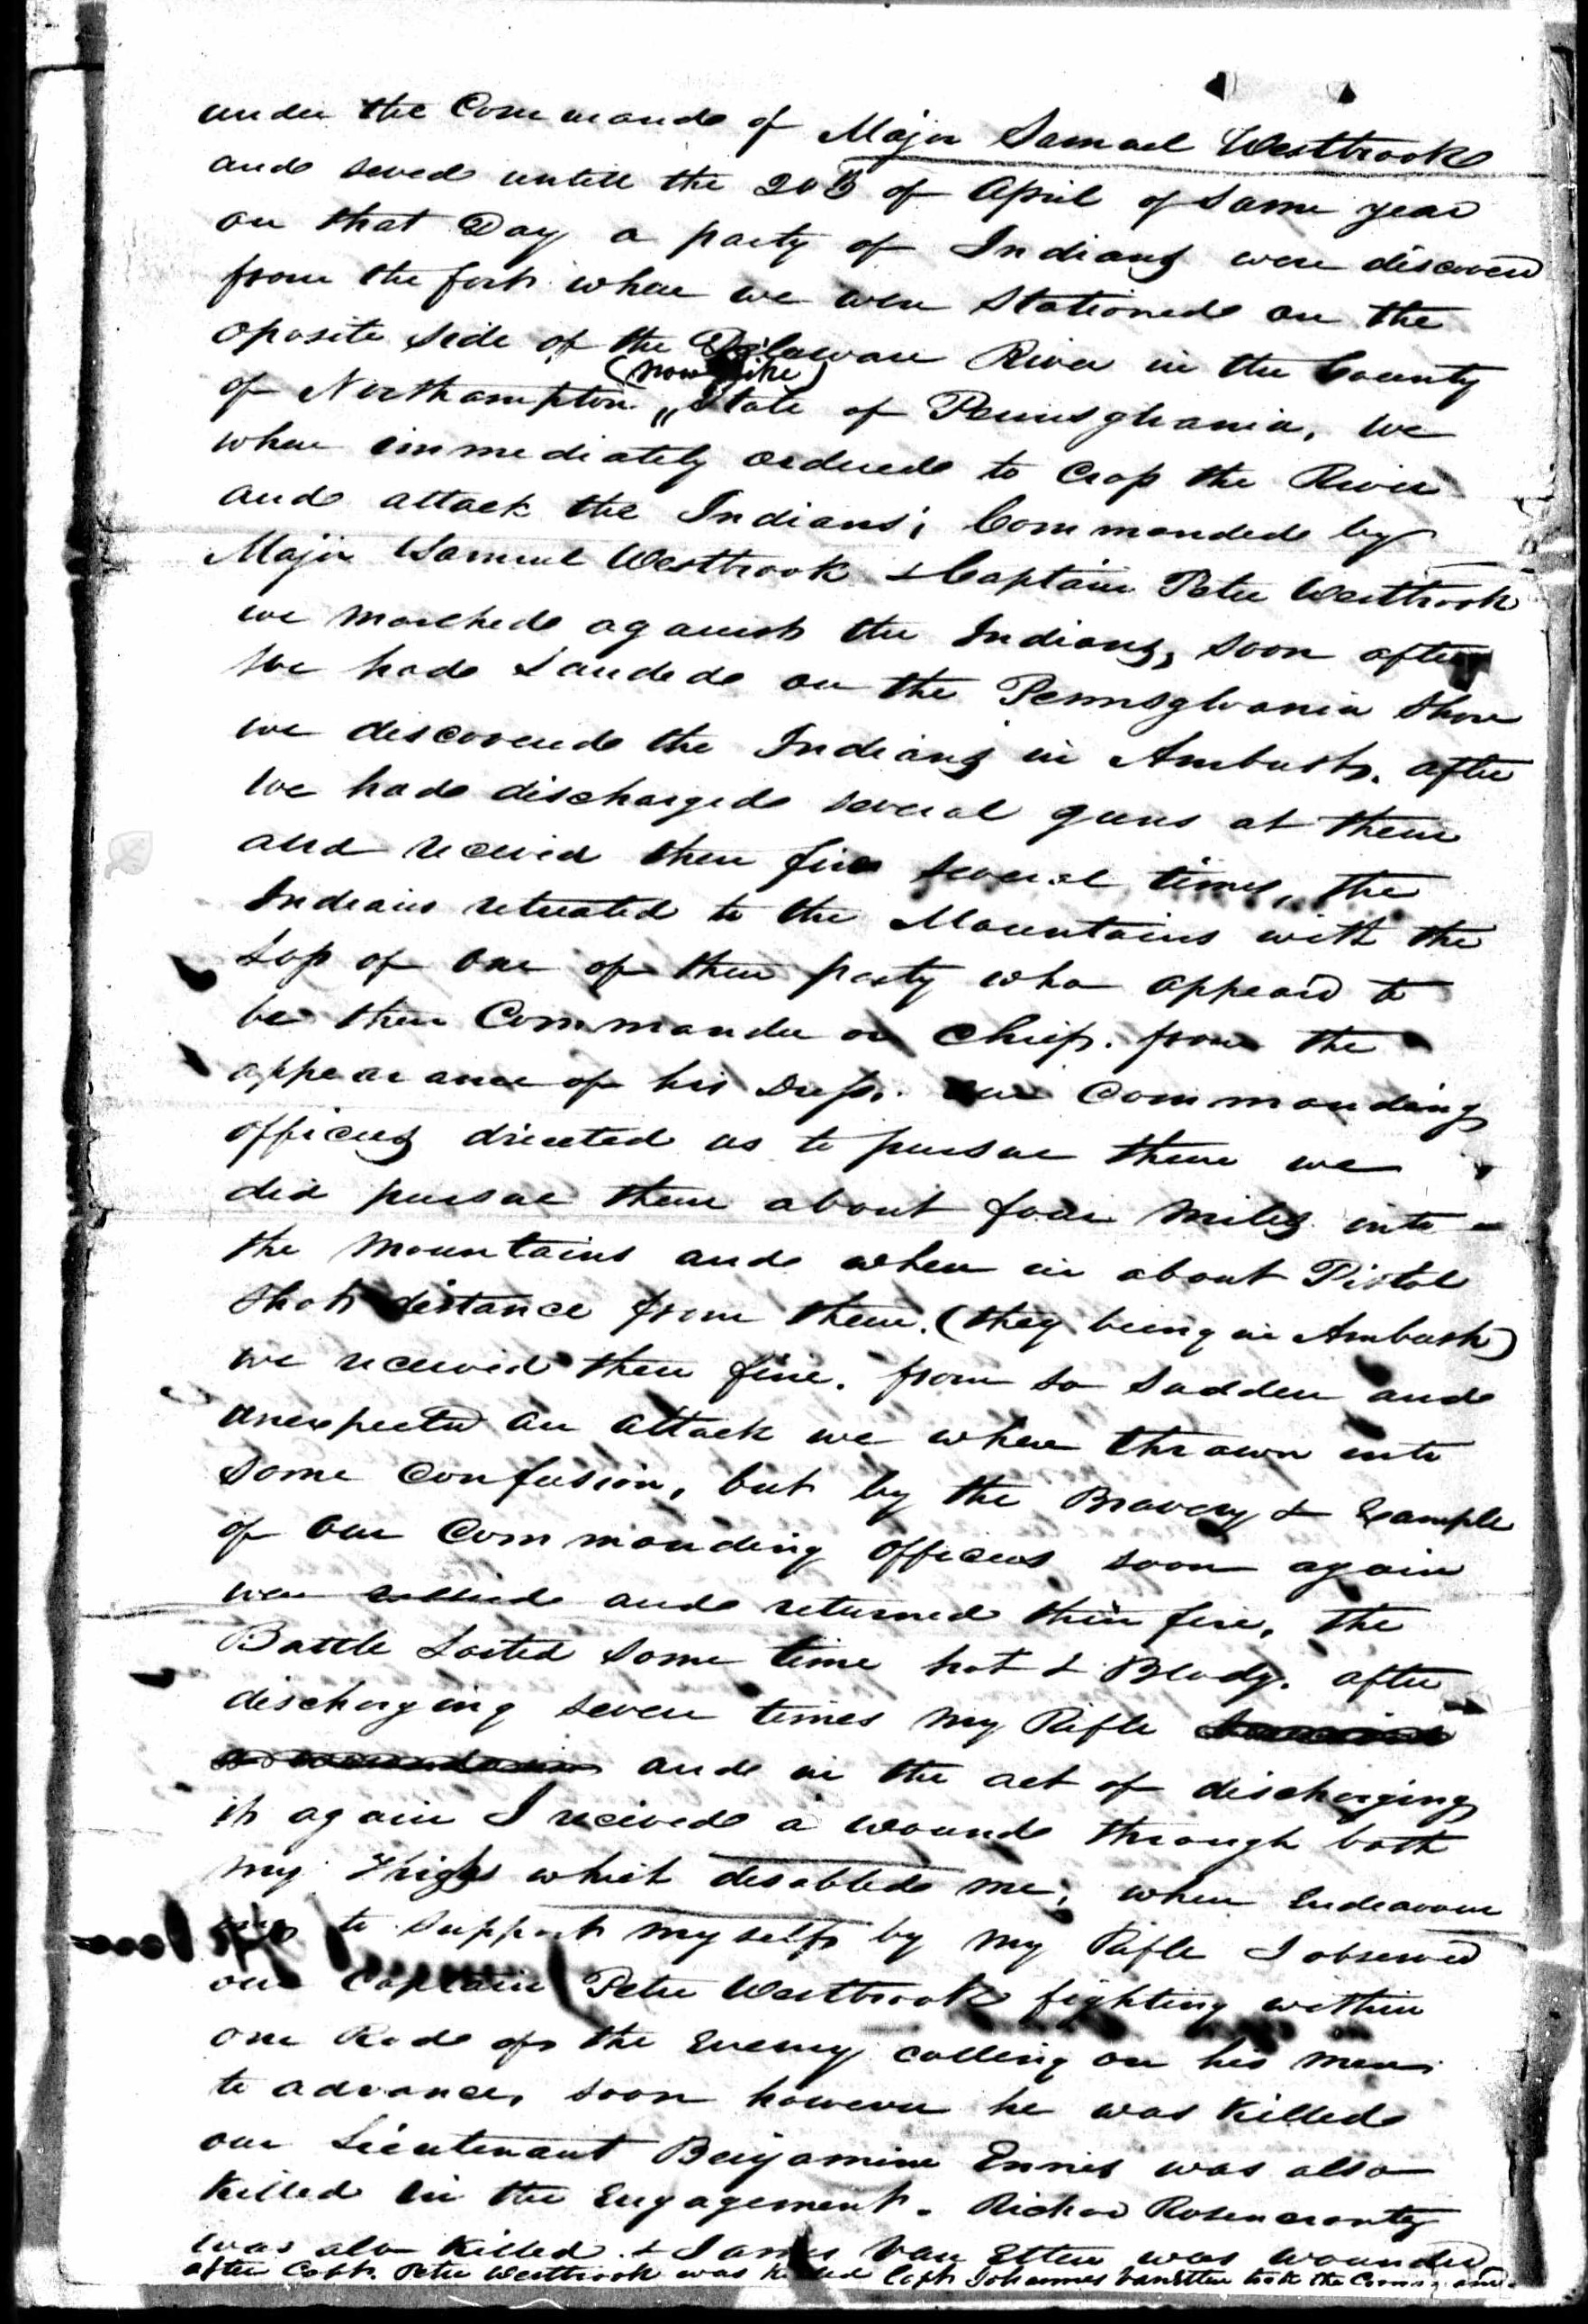 Page 2 from Samuel Helm's pension